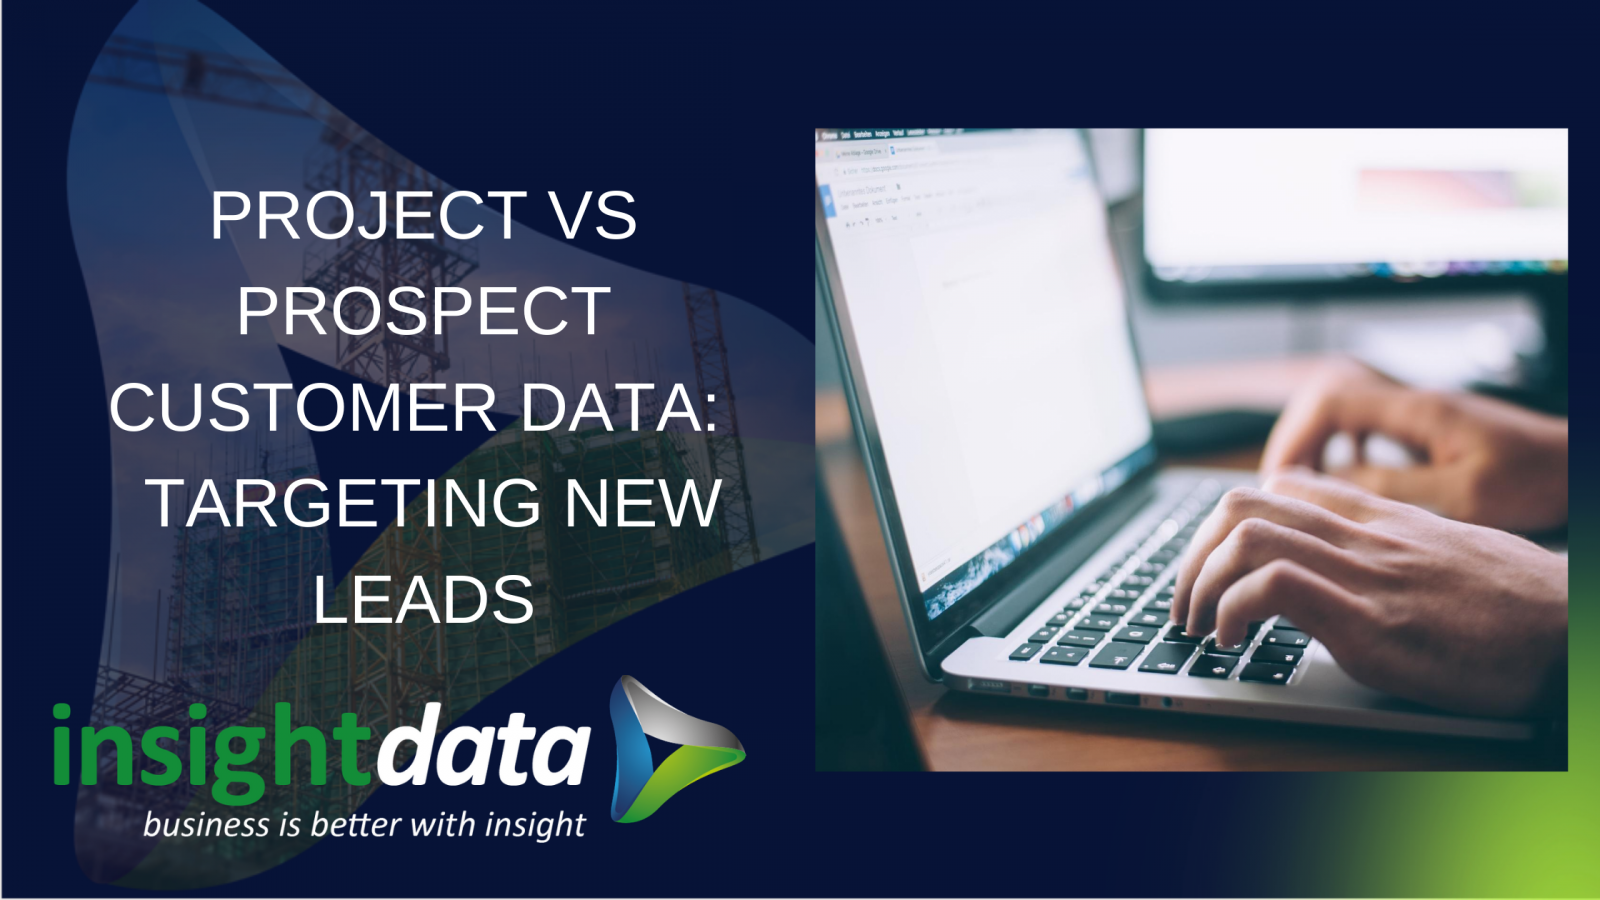 USING PROJECT VS PROSPECT CUSTOMER DATA TO TARGET NEW LEADS 